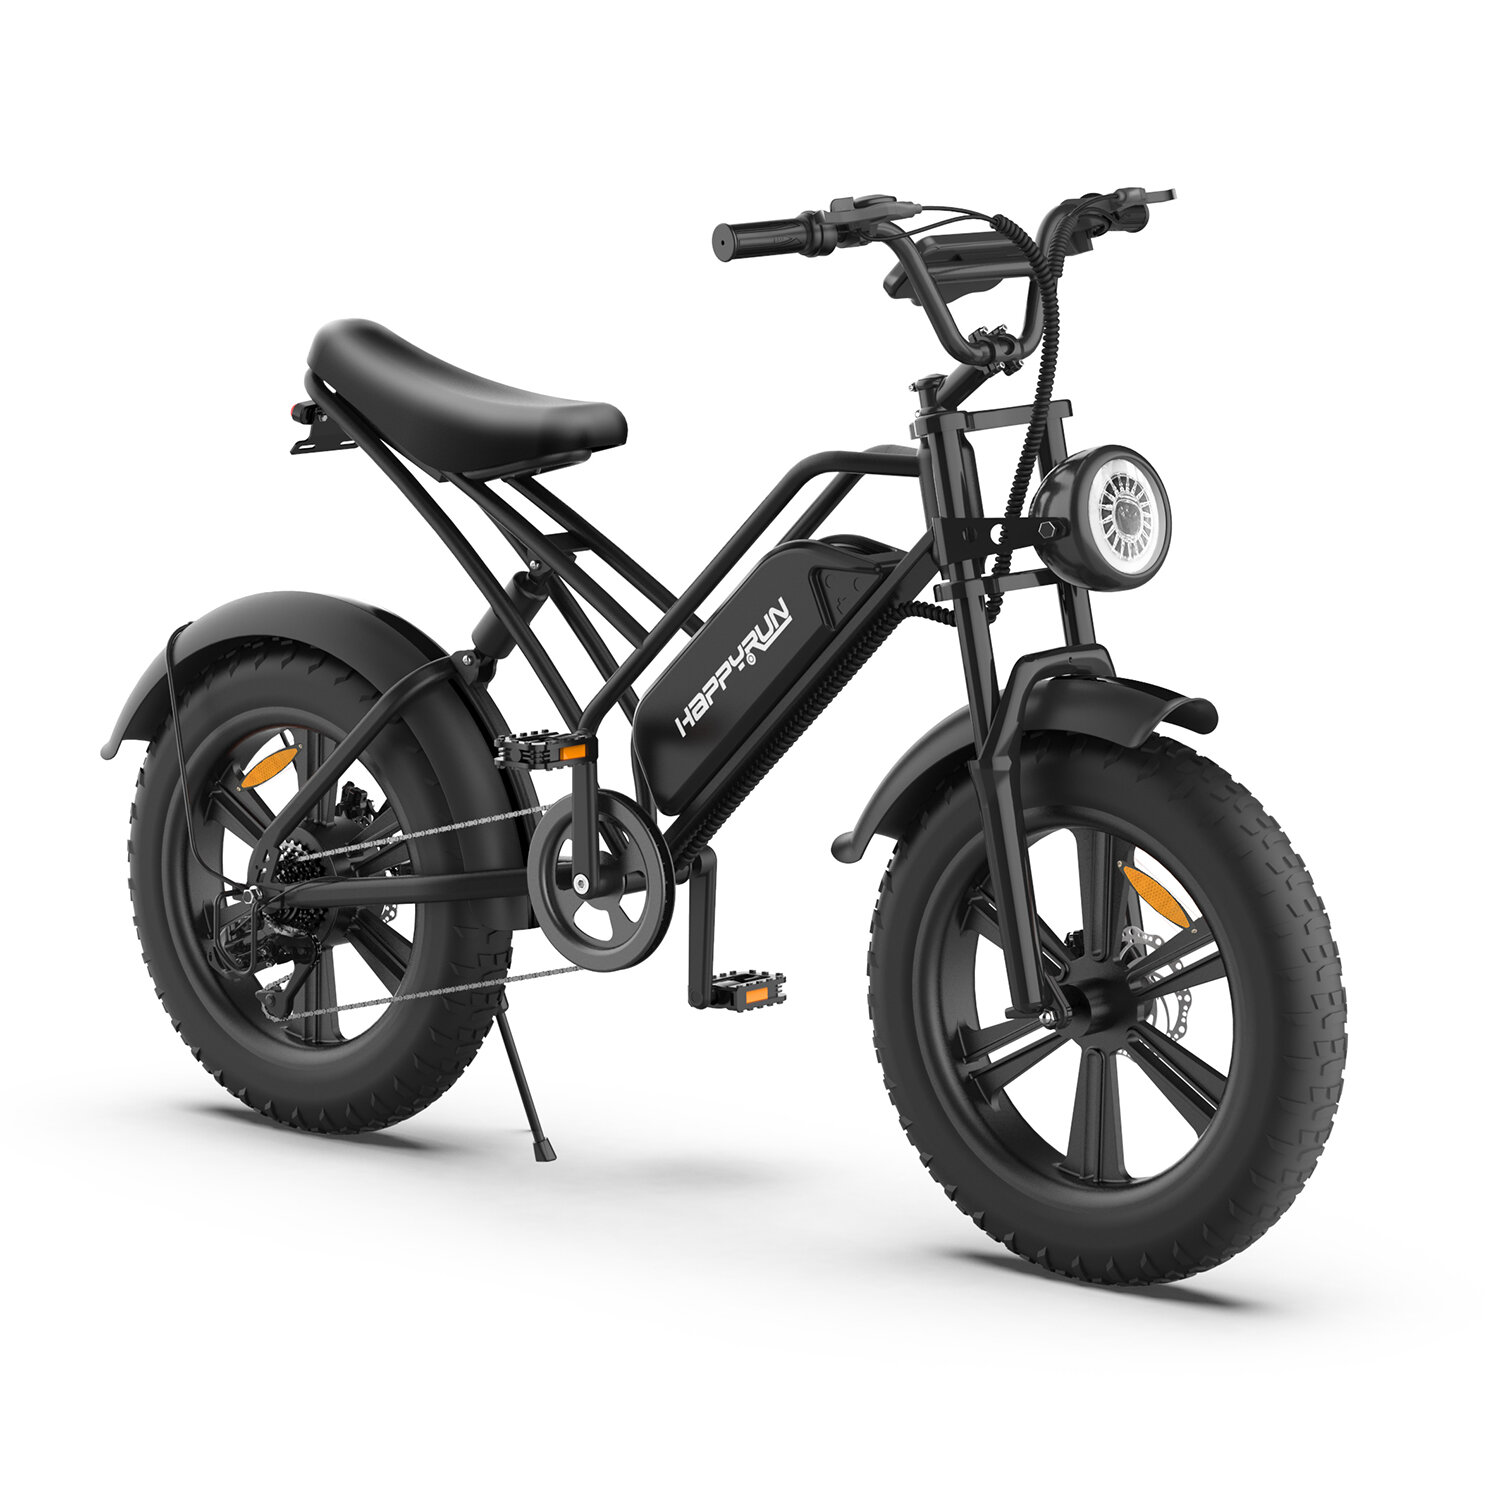 [USA DIRECT] HAPPYRUN HR-G50 Electric Bike 48V 18Ah Battery 750W Motor 20inch Tires 110KM Mileage 120KG Max Load Electric Bicycle COD